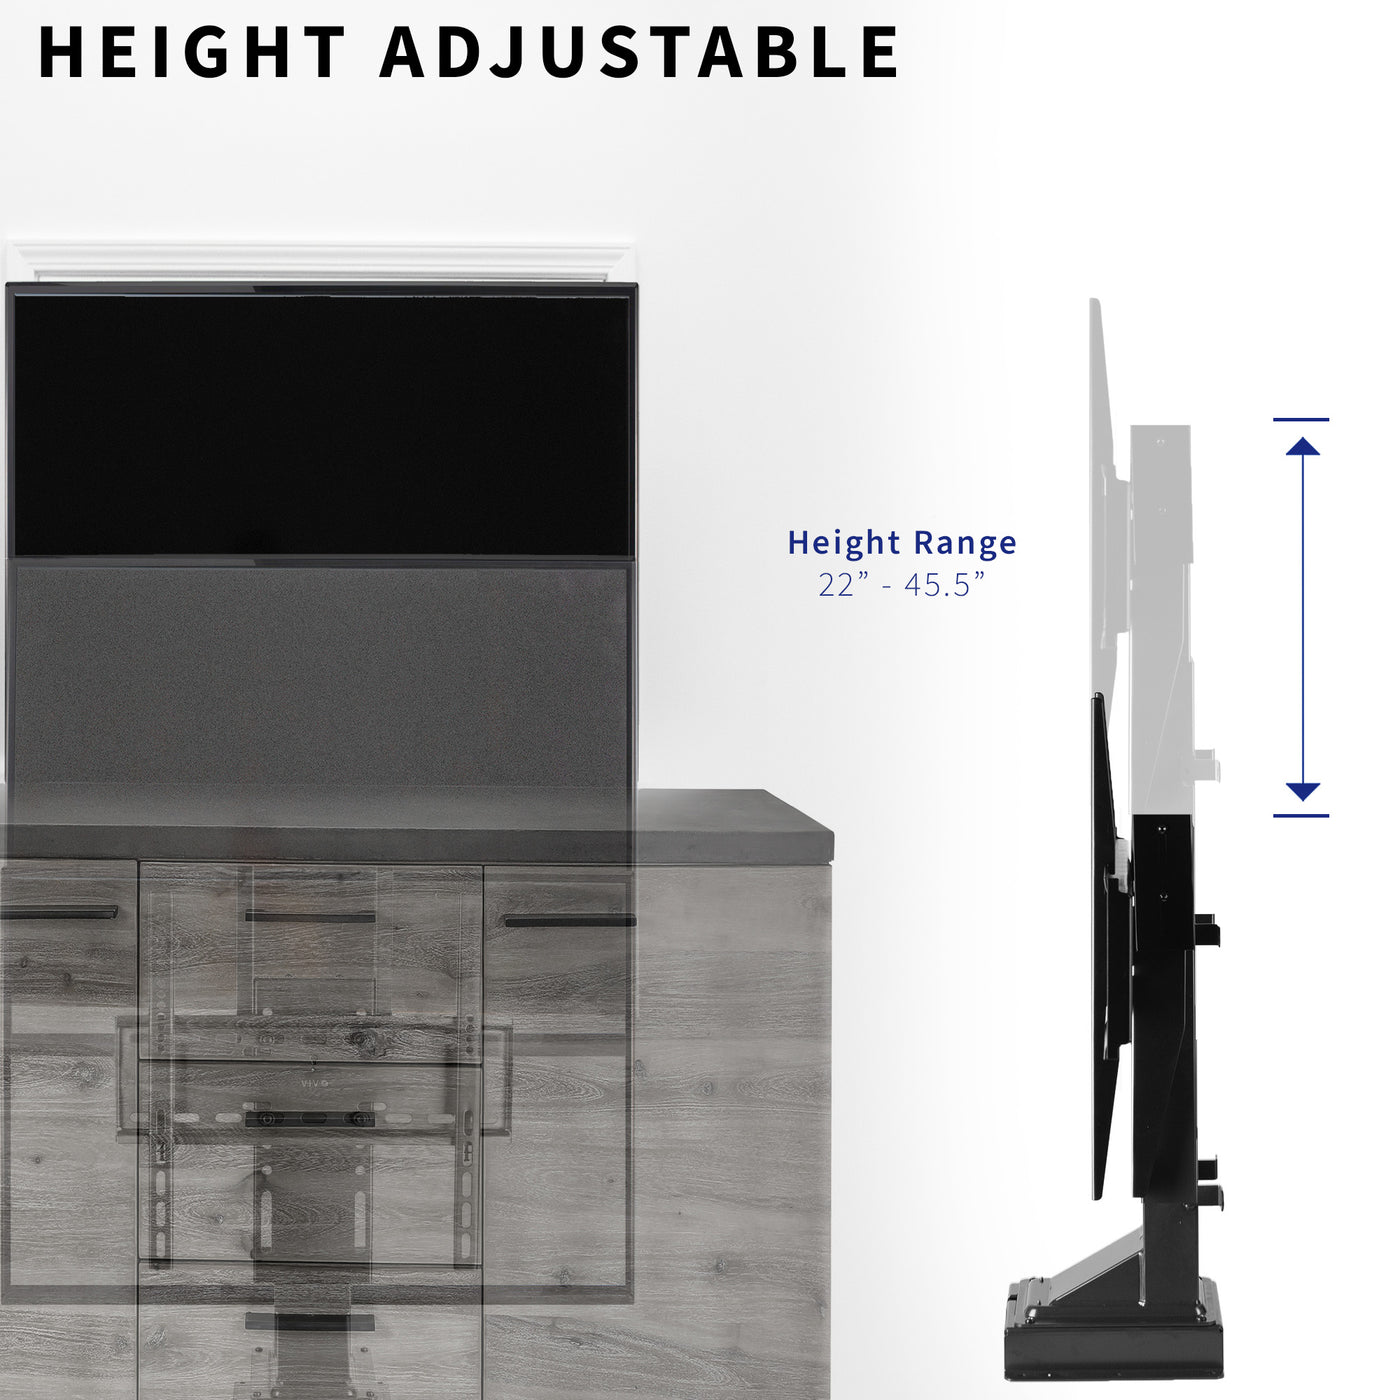 Height adjustable TV stand that can elevate a TV up from behind a dresser.